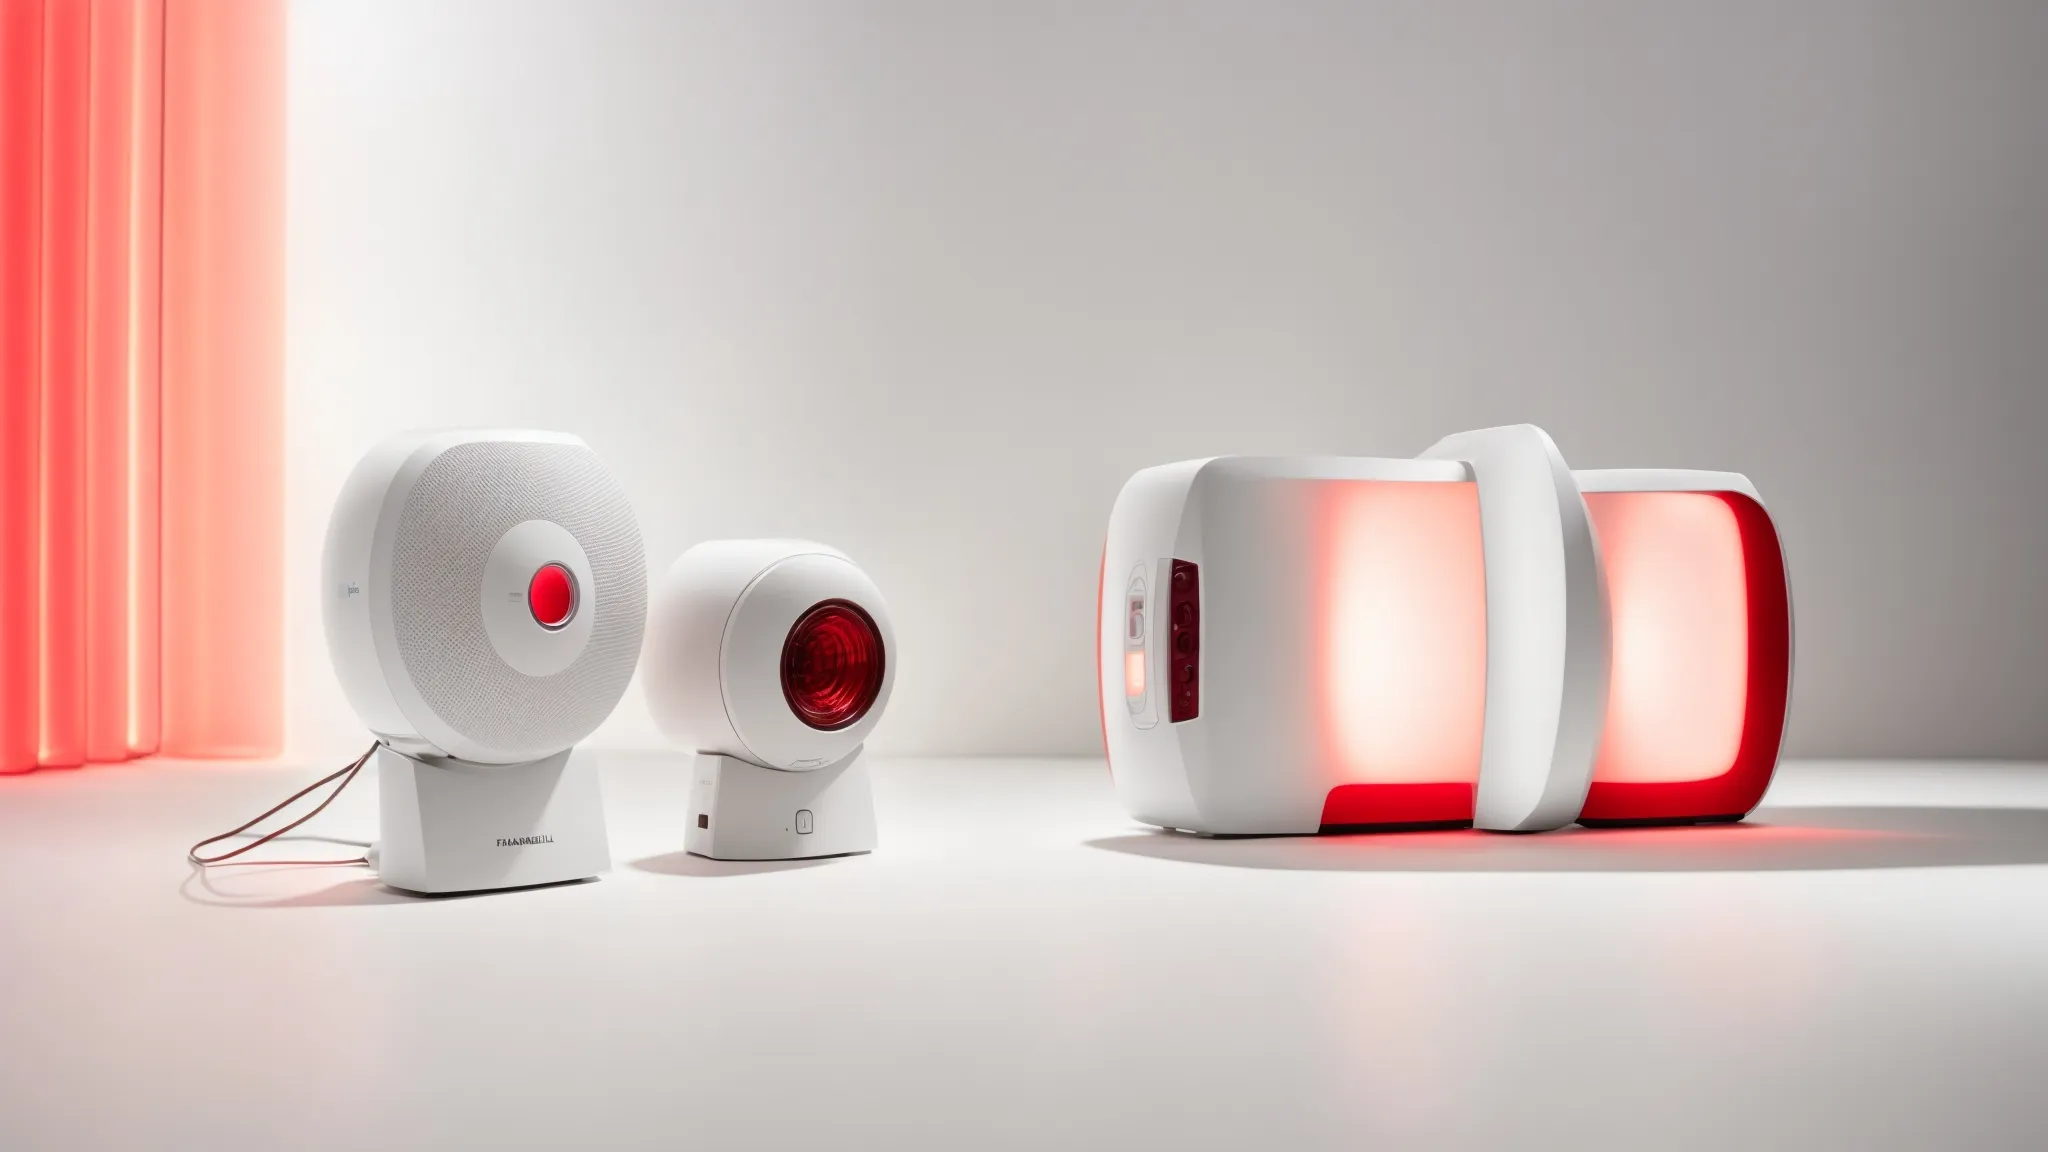 three red light therapy devices, ranging from a small facial mask to a large full-body panel, displayed side by side on a plain background.